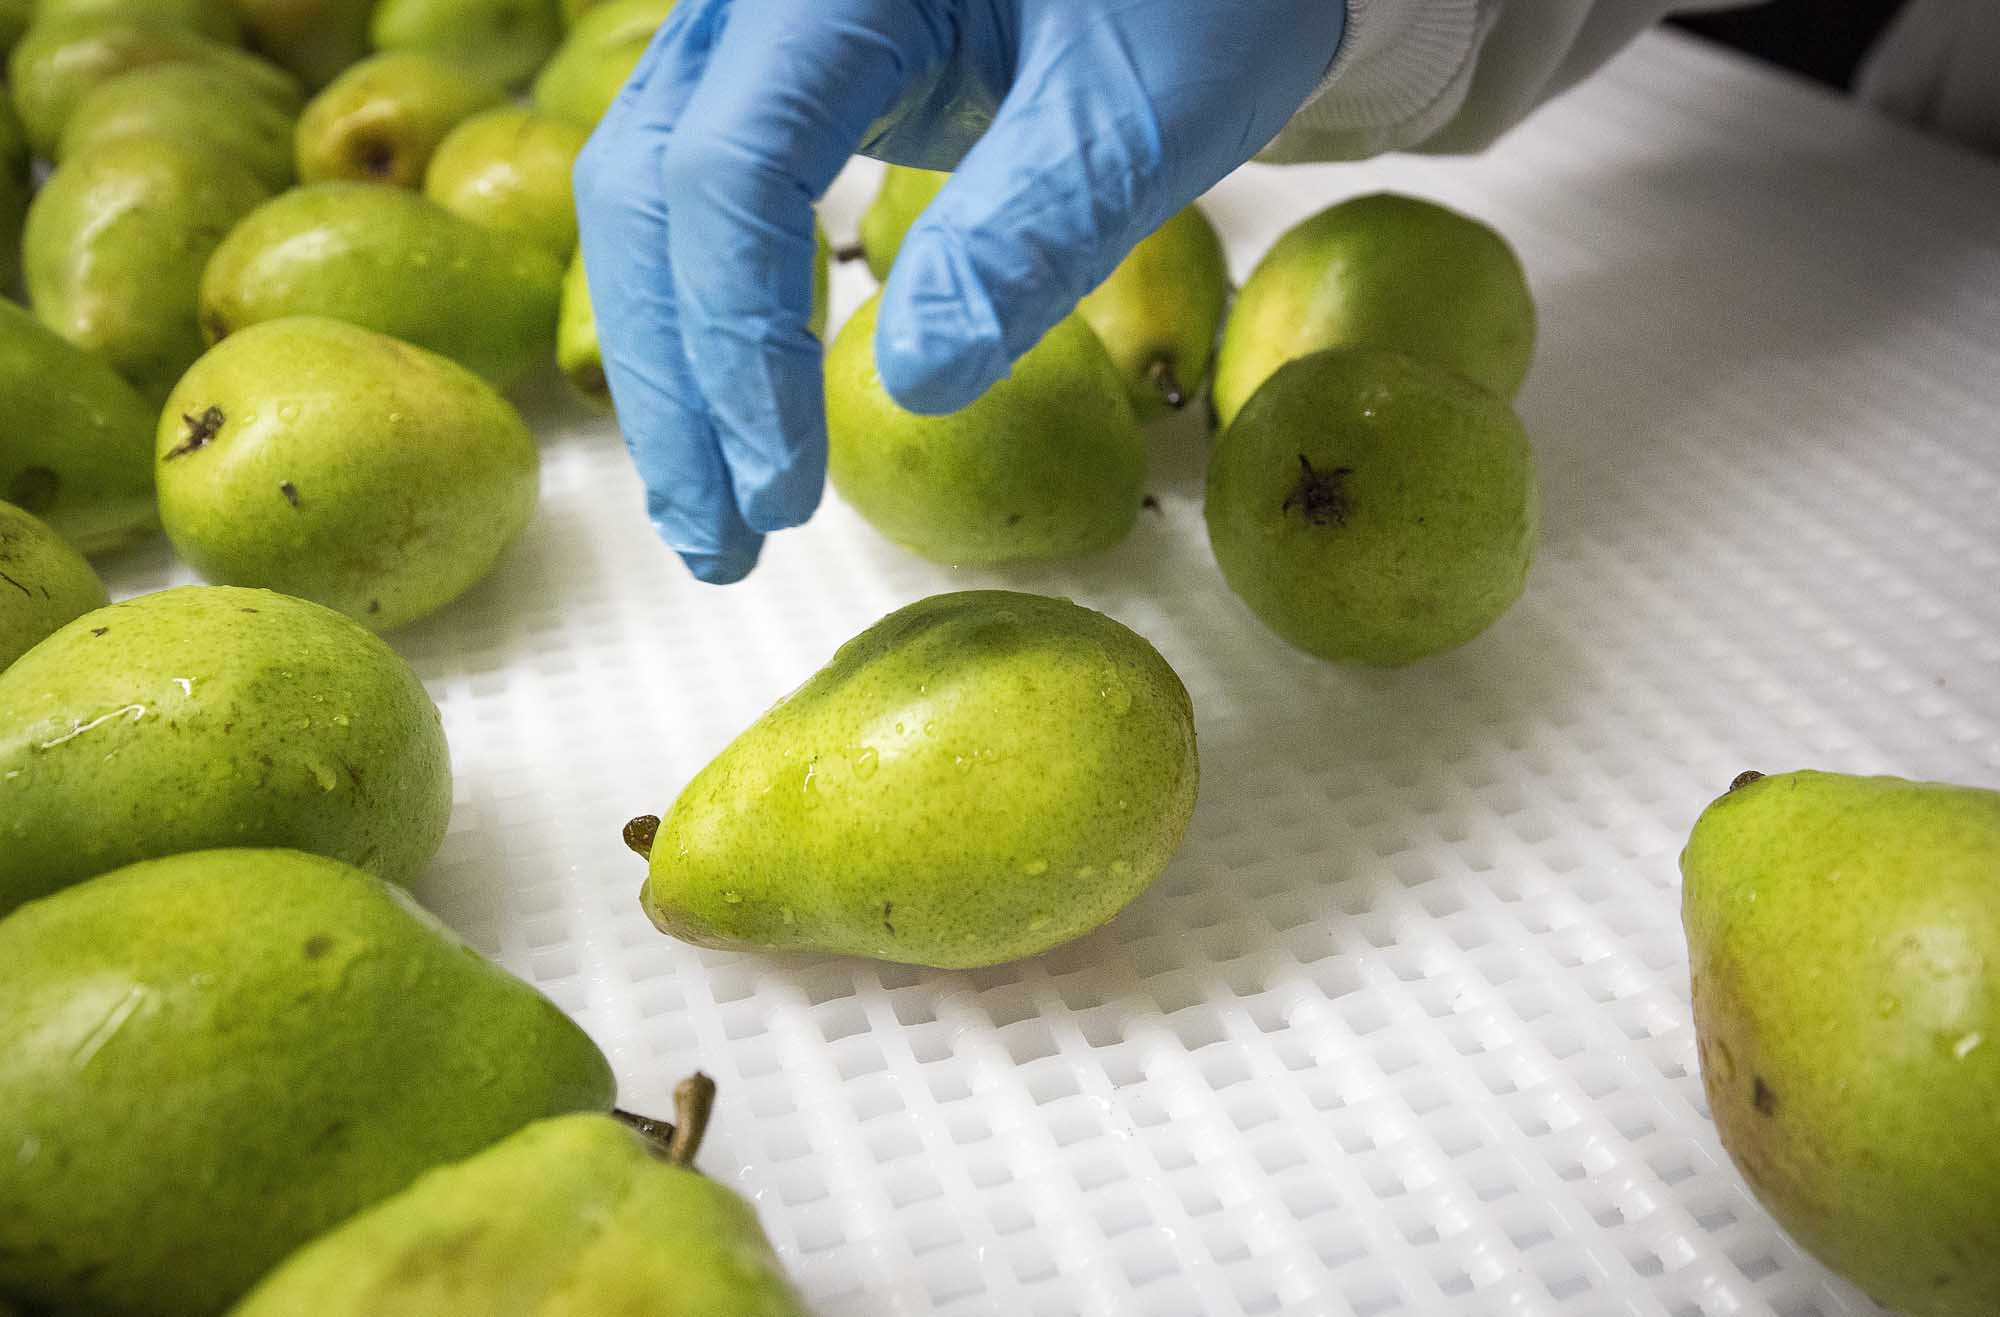 Pear processing at Woot Fruit's facility in Kingsburg, California, about 20 miles south of Fresno, on April 9, 2015. (TJ Mullinax/Good Fruit Grower)